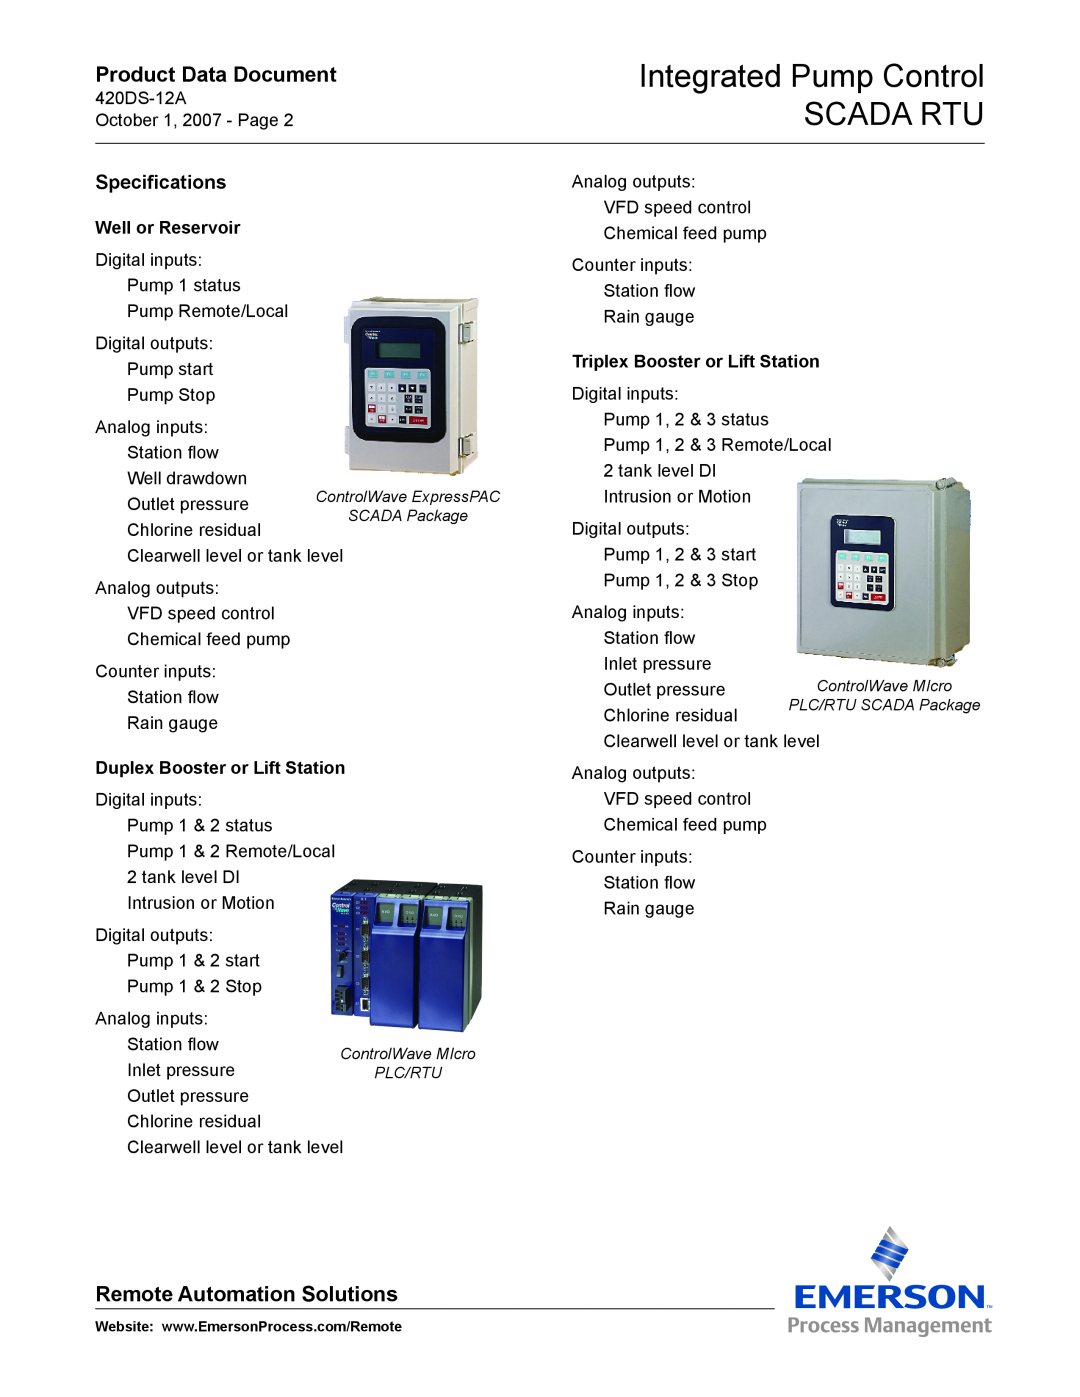 Emerson Process Management Integrated Pump Control SCADA RTU, Specifications, Well or Reservoir, Product Data Document 